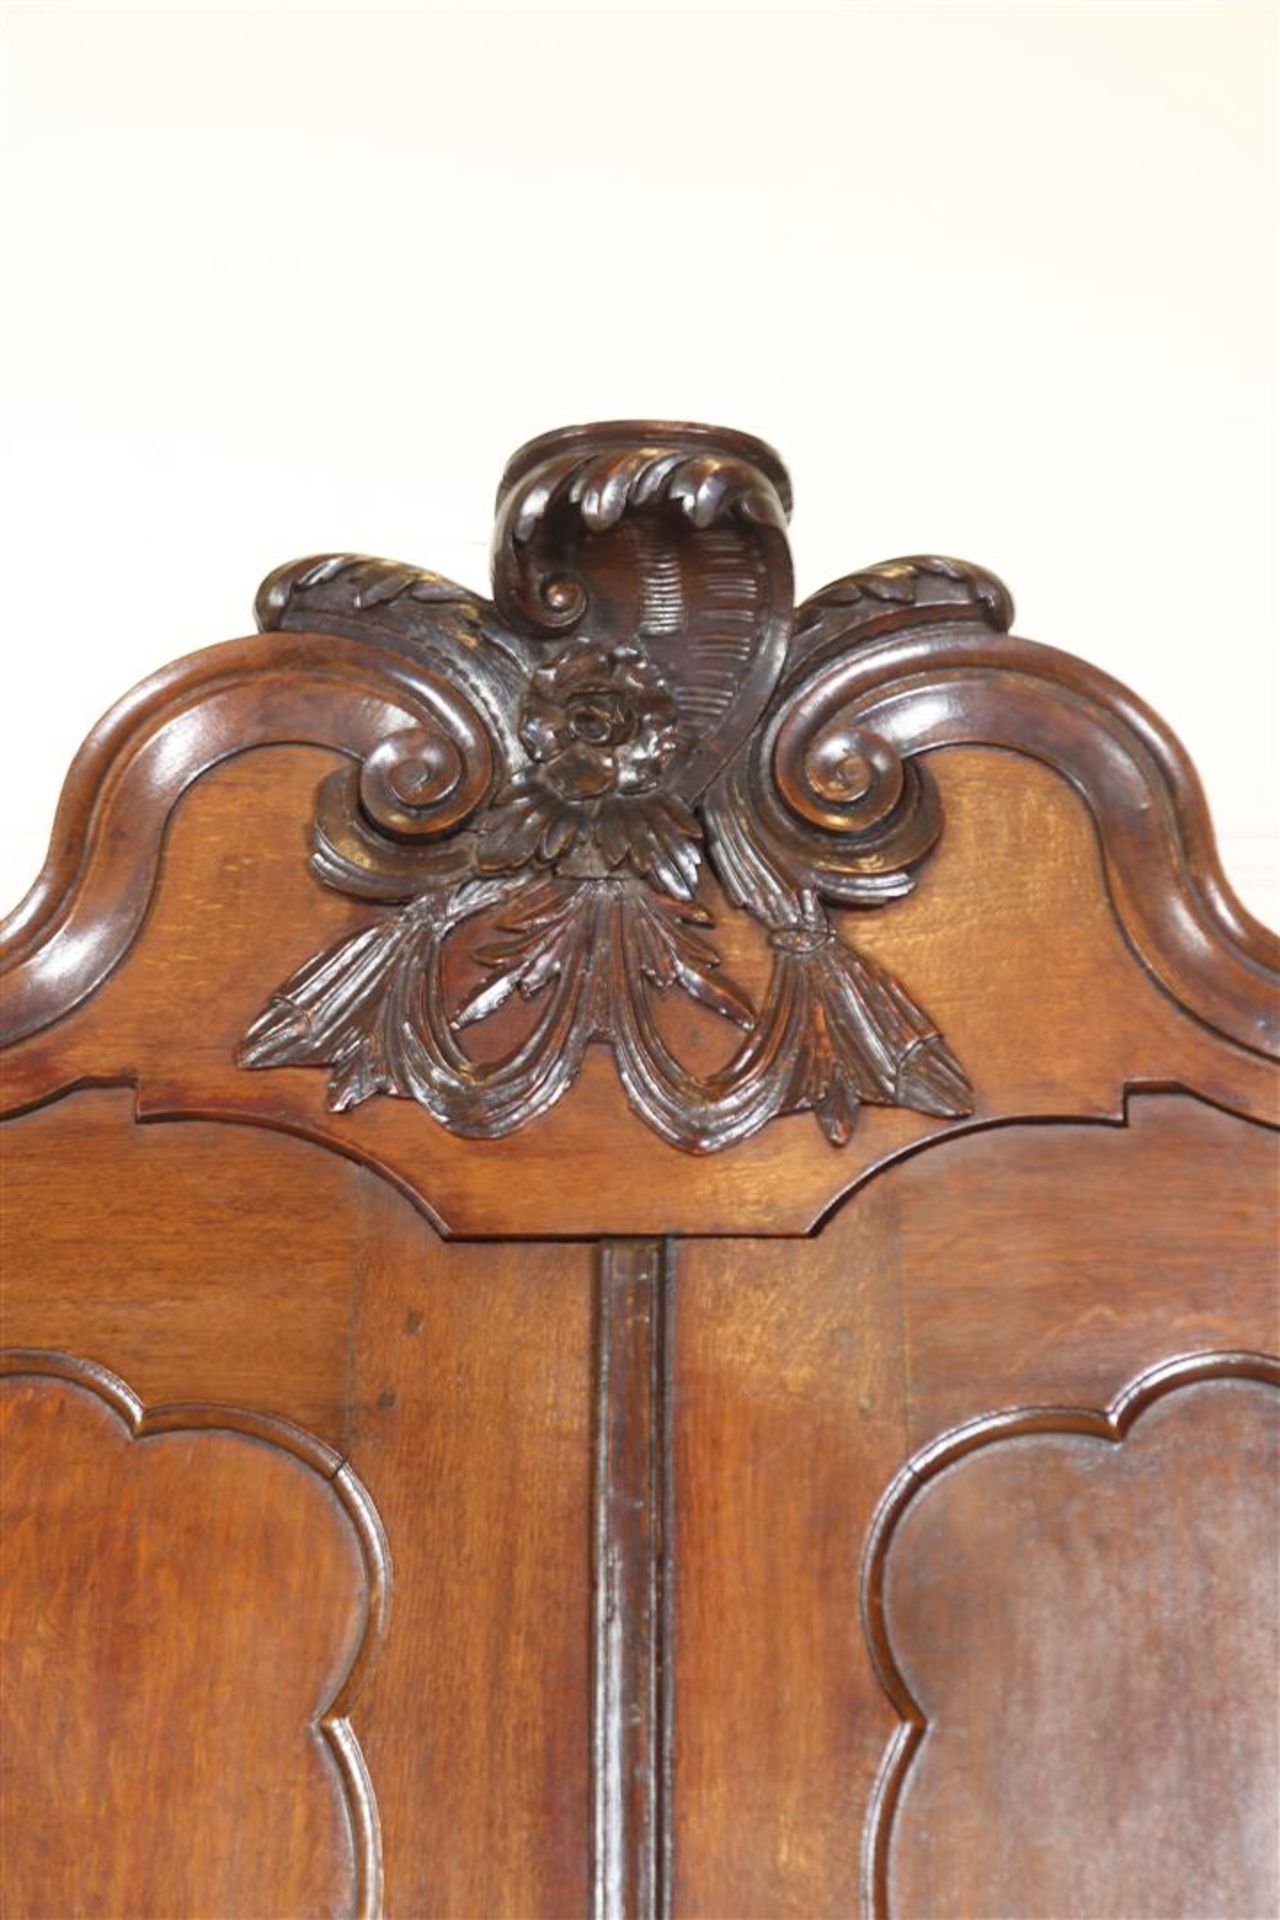 Oak Louis XV cabinet with contoured hood with carved crest, 2 panel doors on 3 curved drawers - Image 3 of 6